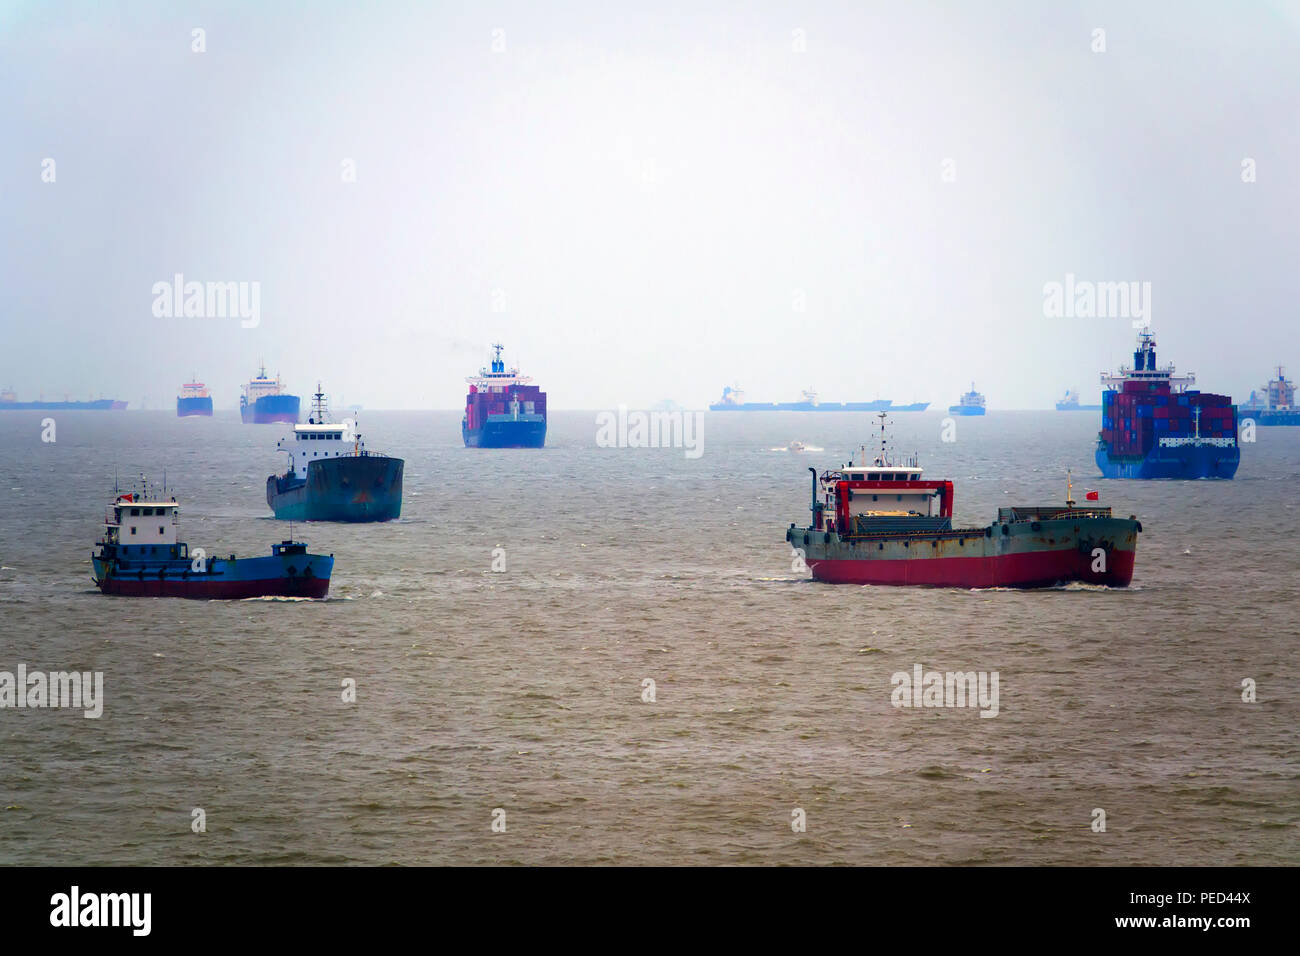 Container ships and fishing boats in Shanghai China Asia East China Sea Yangtze River Delta Stock Photo